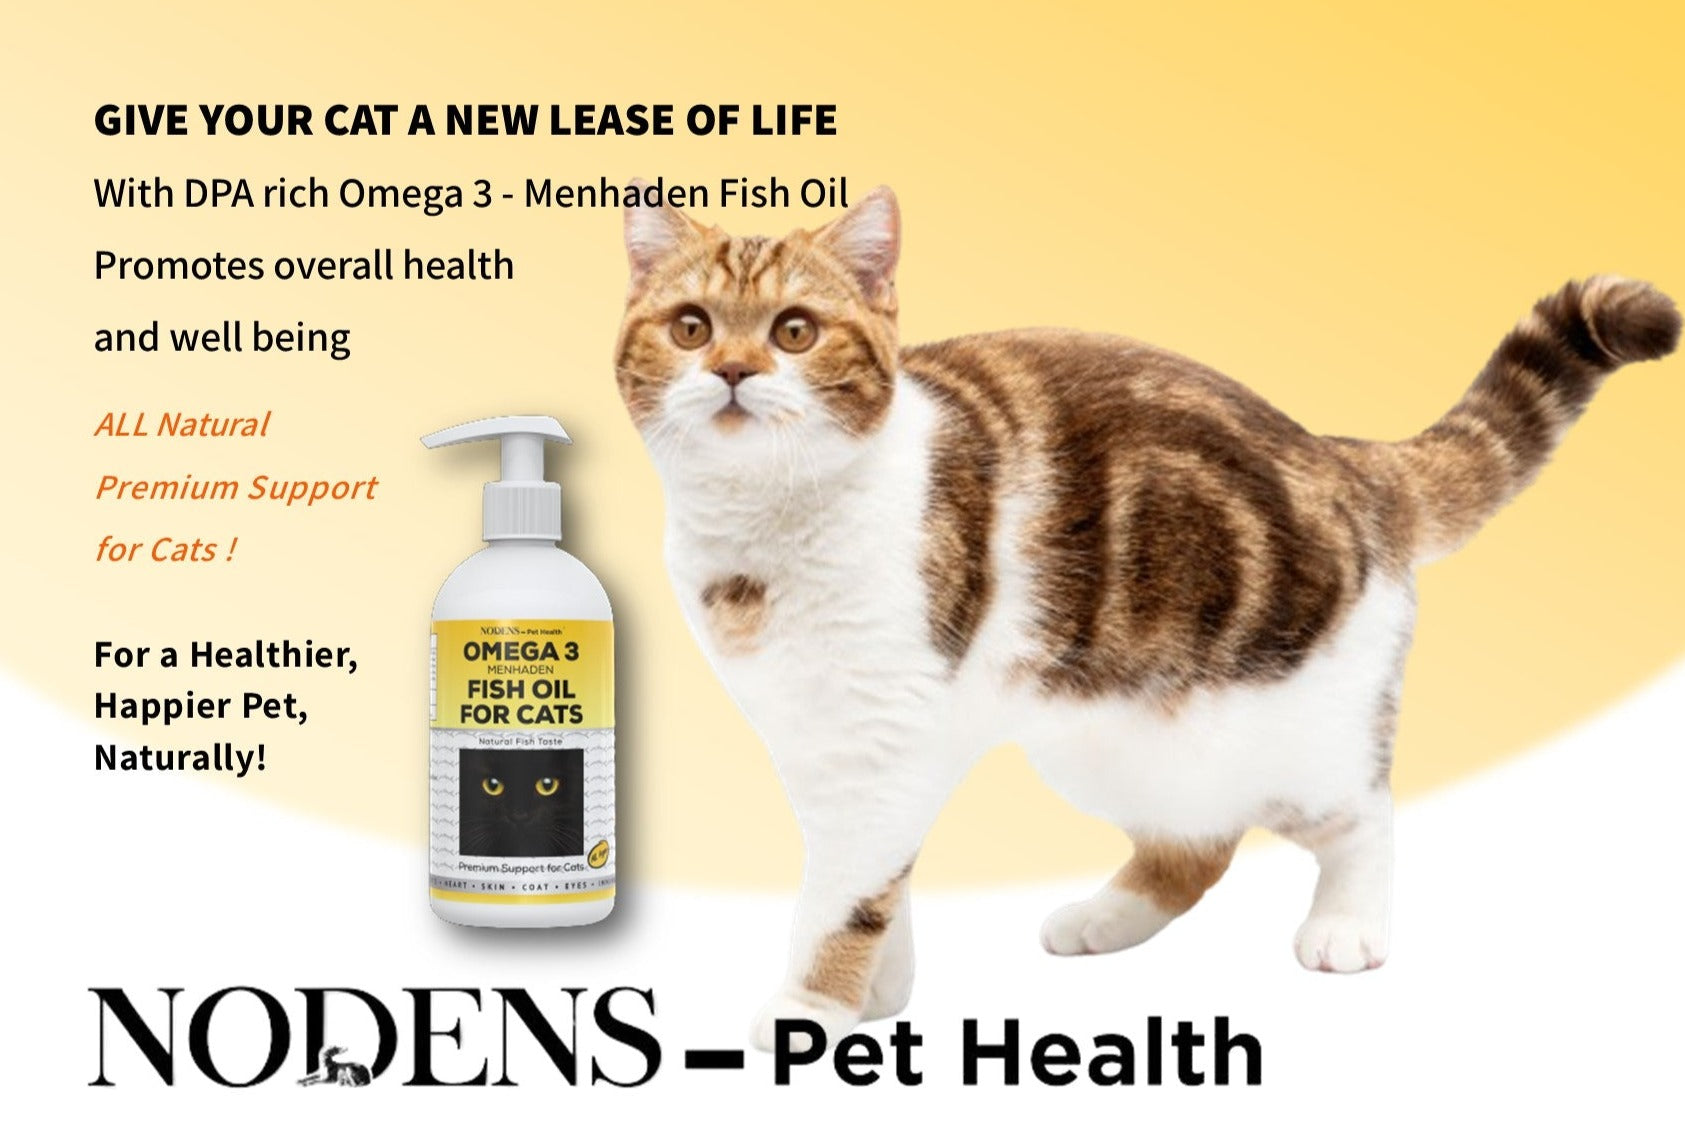 Nodens Omega 3 fish oil for cats